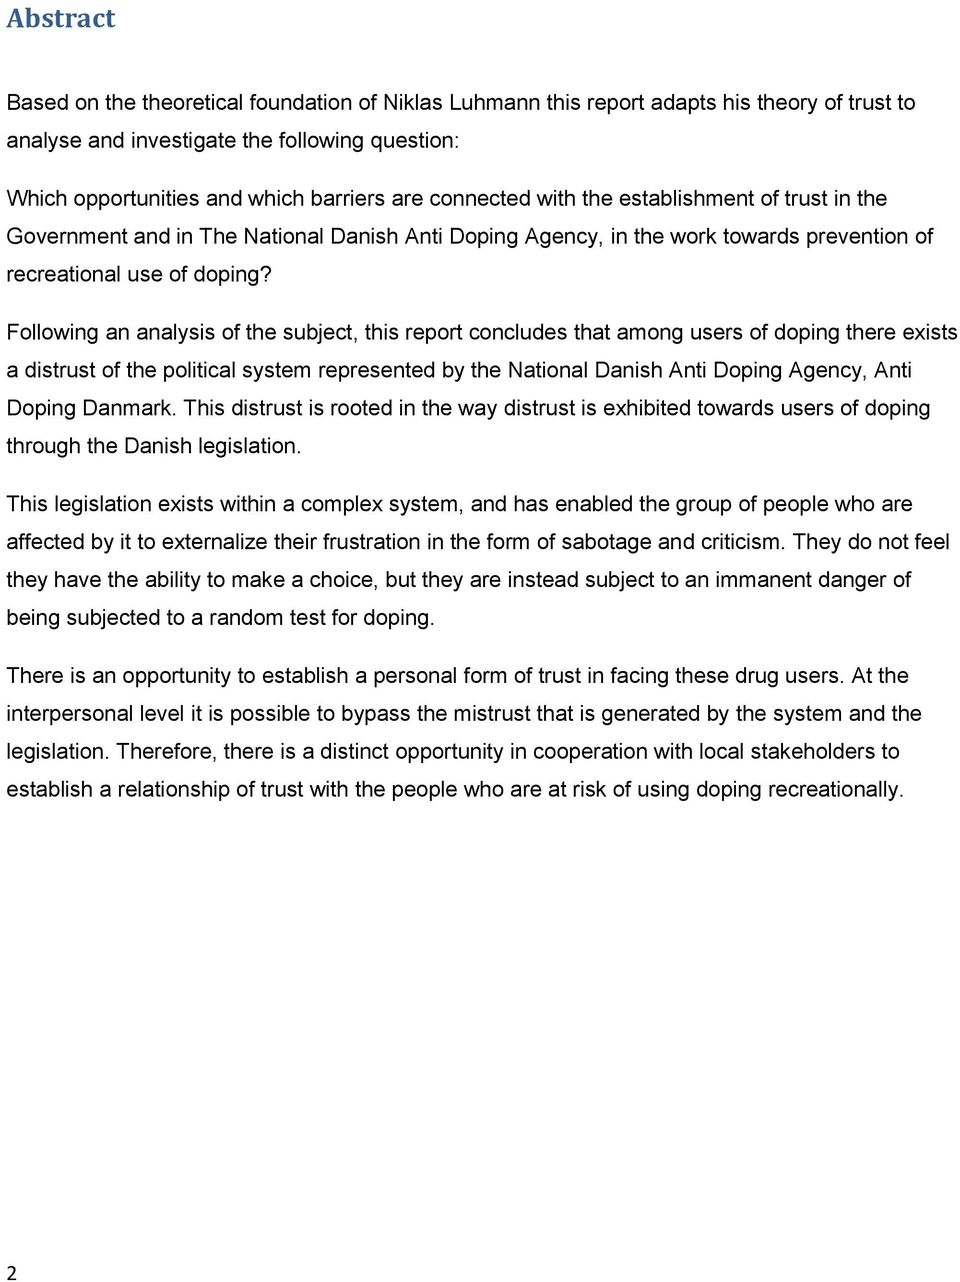 Following an analysis of the subject, this report concludes that among users of doping there exists a distrust of the political system represented by the National Danish Anti Doping Agency, Anti